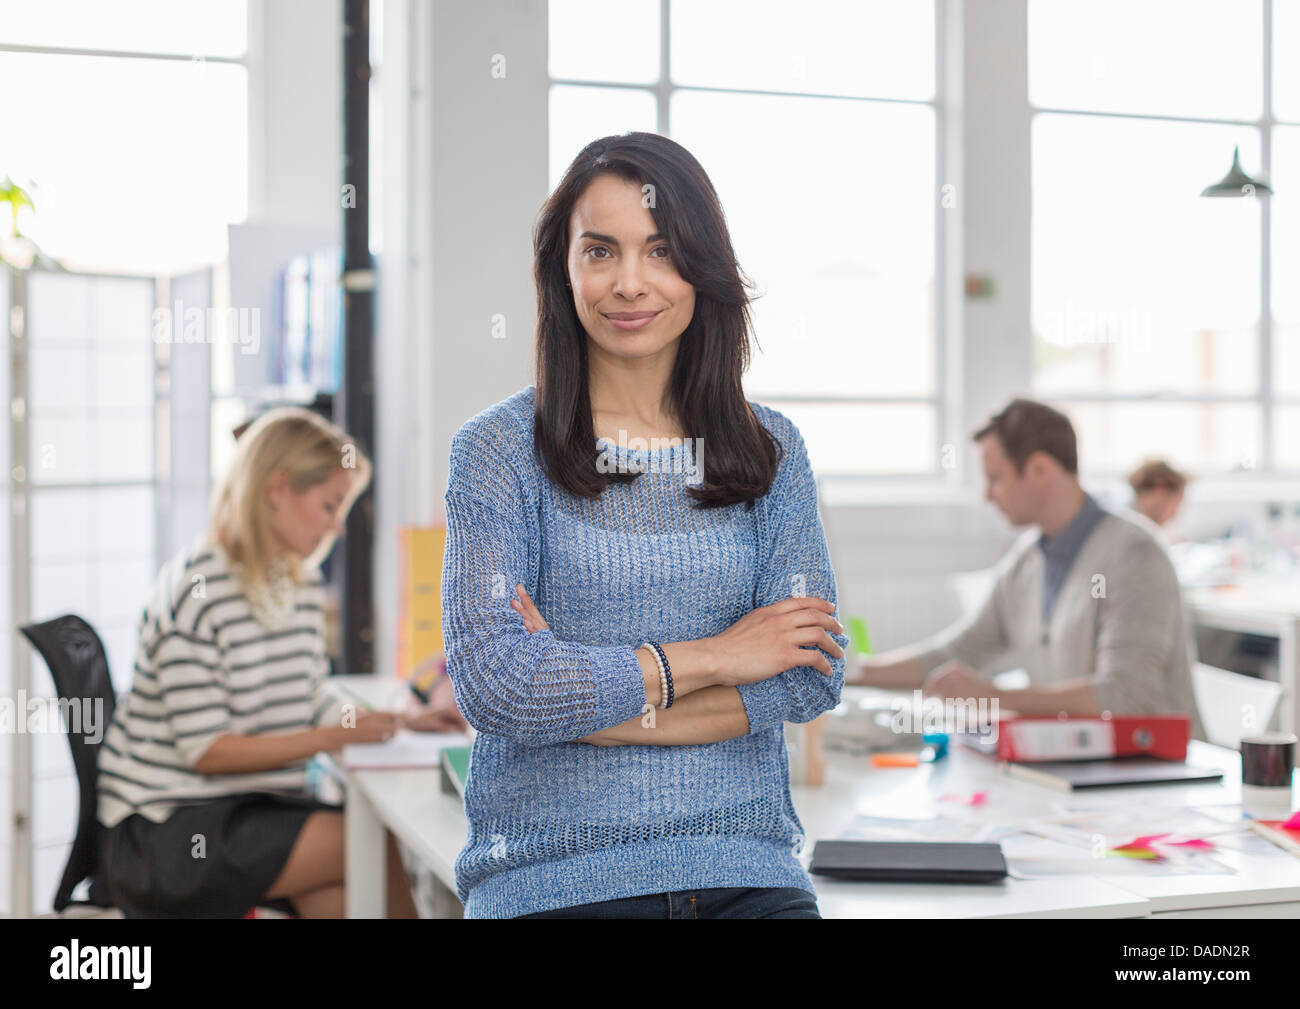 Mid adult woman sitting on desk and smiling in creative office, portrait Stock Photo